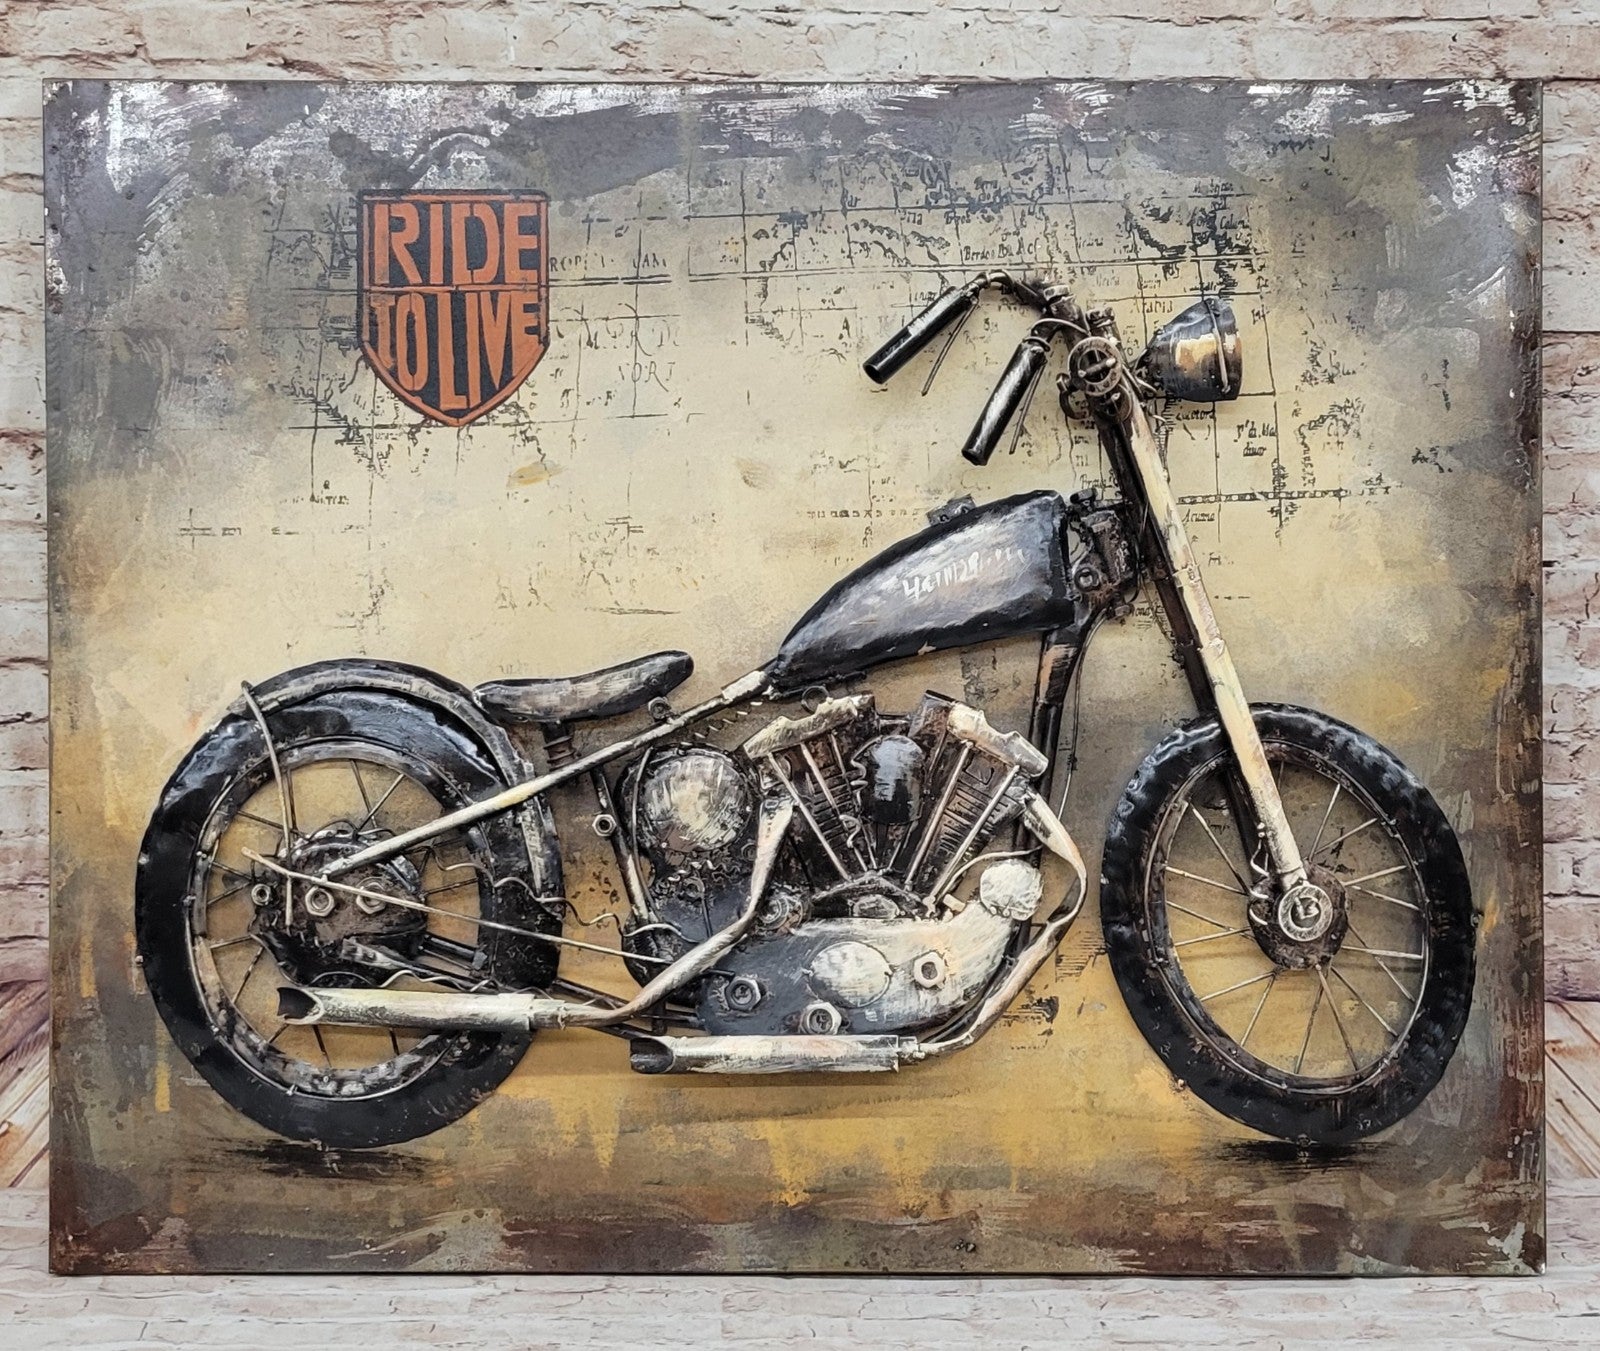 Framed Motorcycle Wall Art Metal Canvas Painting Rustic Landscape Decor Figure